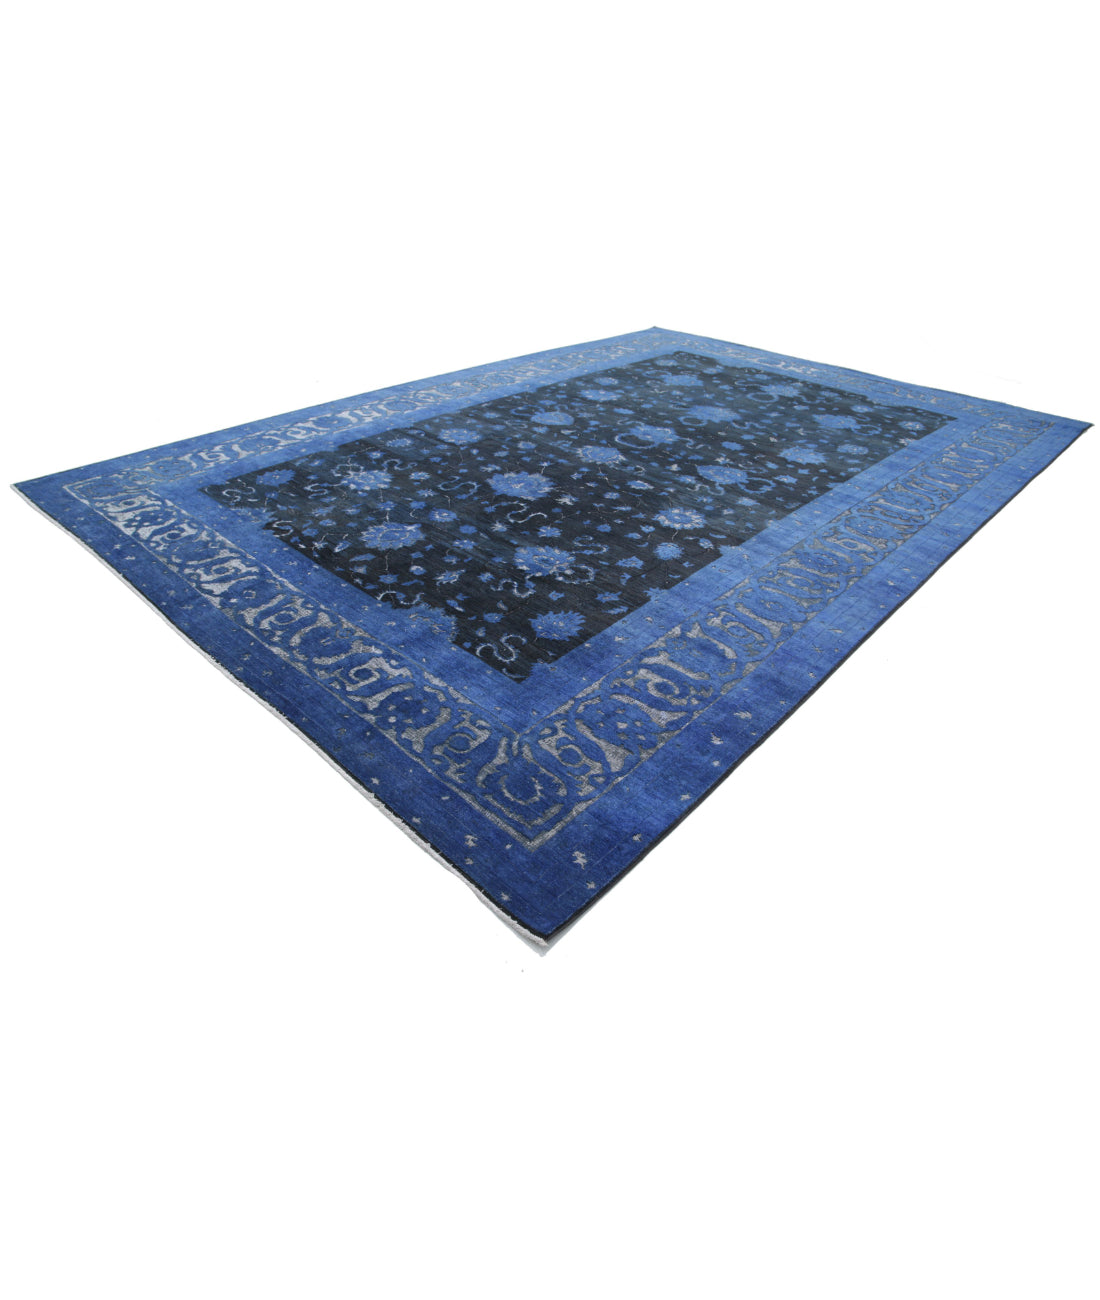 Hand Knotted Onyx Wool Rug - 11'8'' x 17'2'' 11'8'' x 17'2'' (350 X 515) / Blue / Charcoal